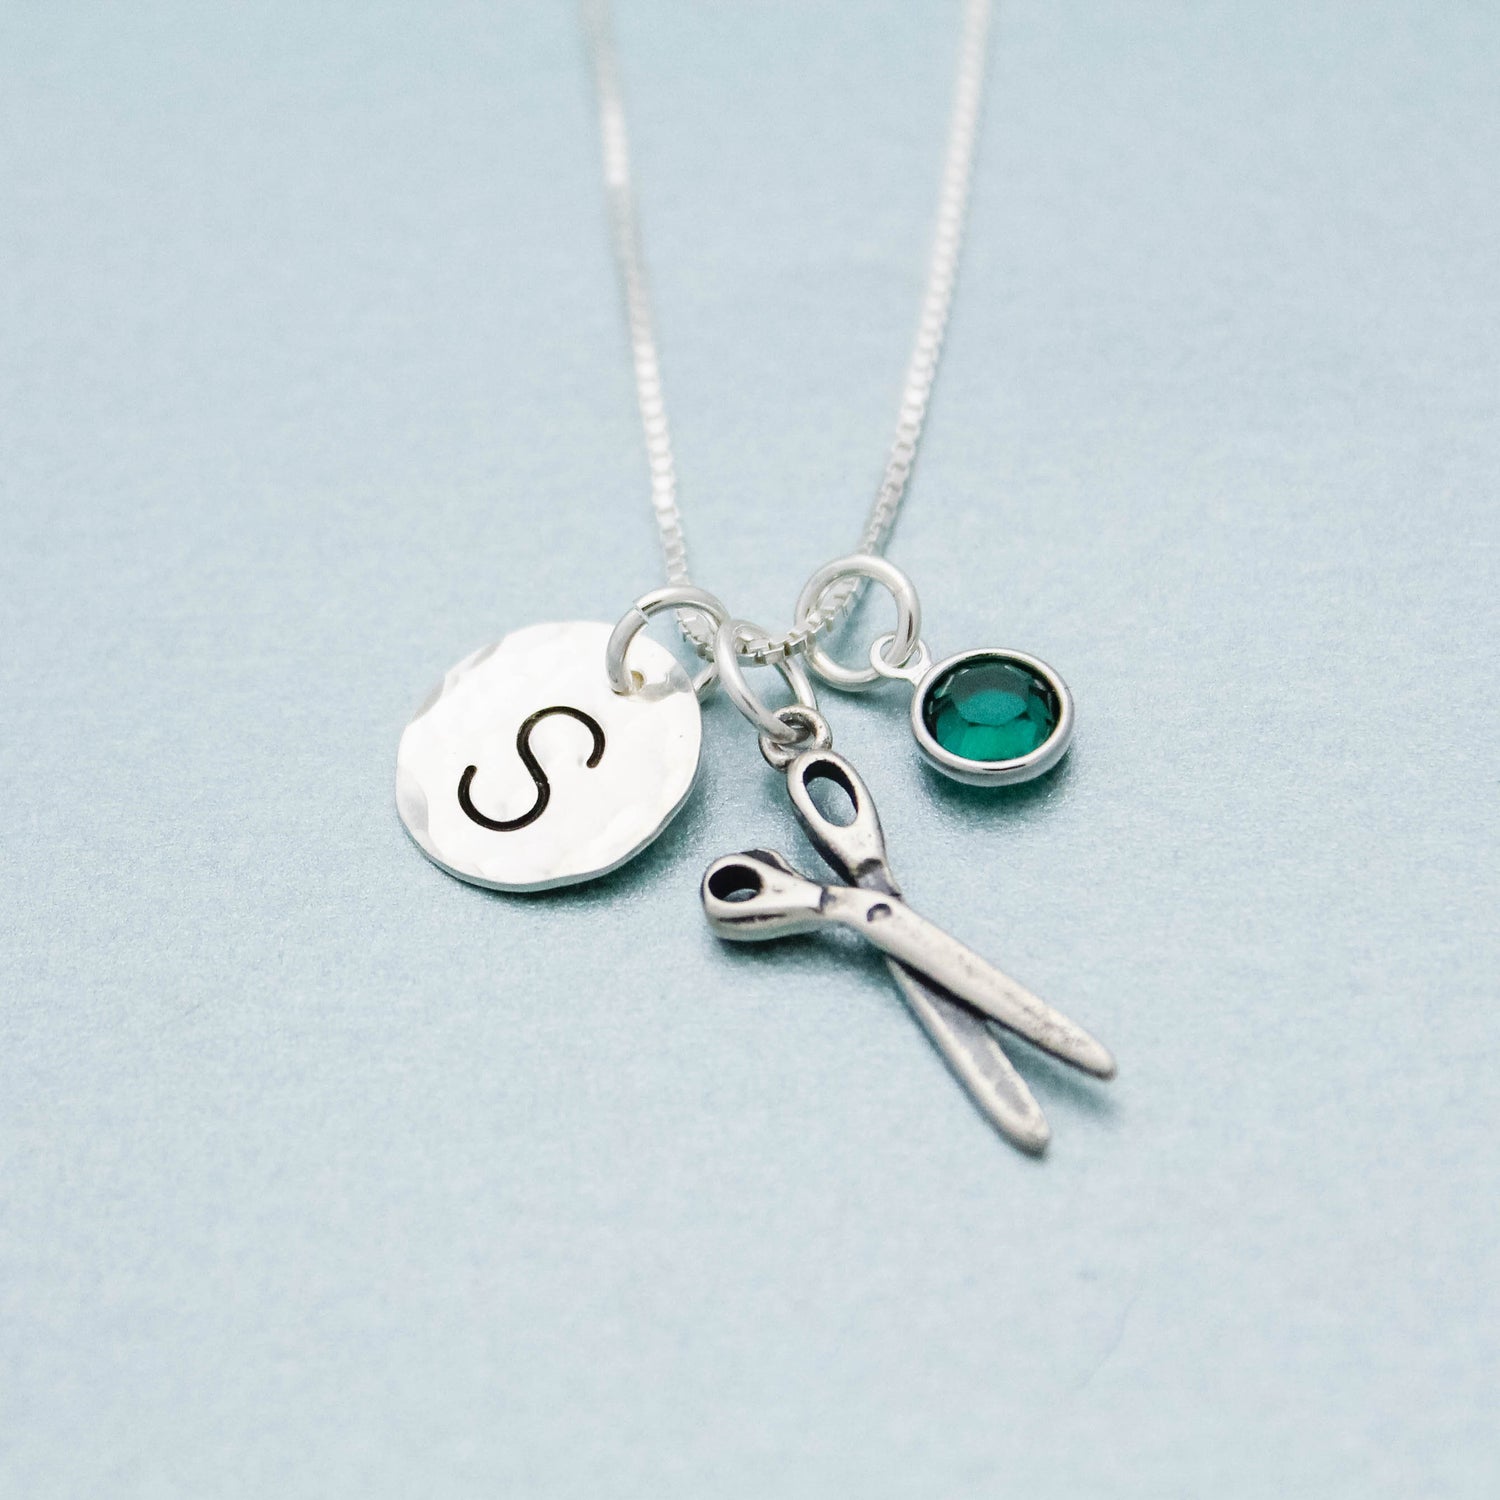 Hair Dresser Gift Personalized Hand Stamped Necklace Beauty Salon Scissors Charm